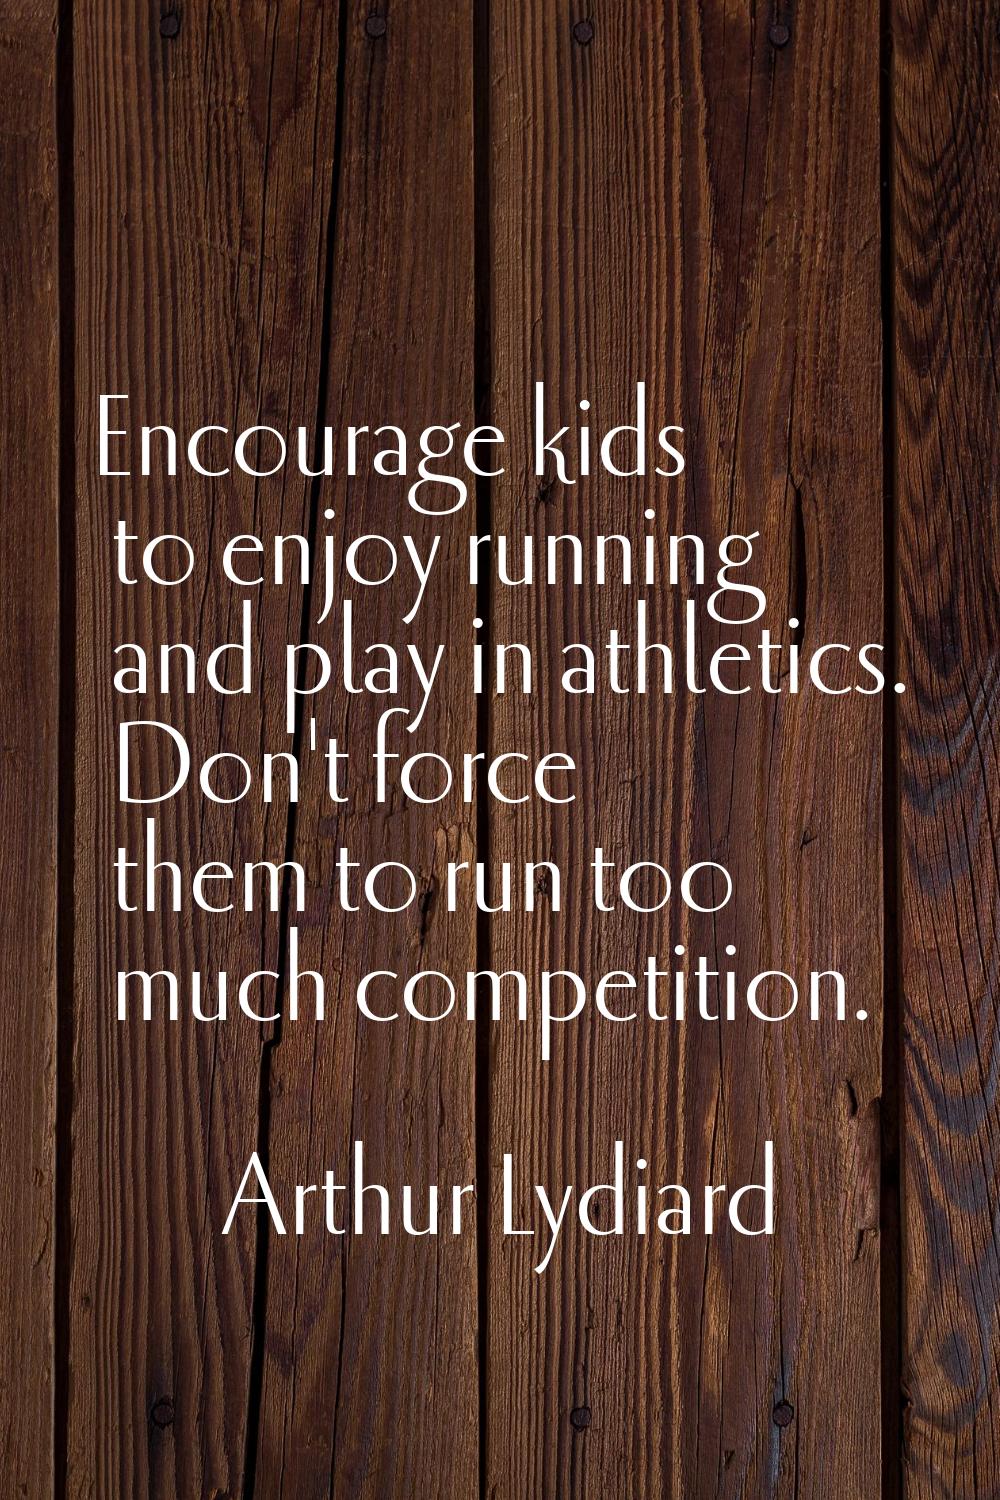 Encourage kids to enjoy running and play in athletics. Don't force them to run too much competition